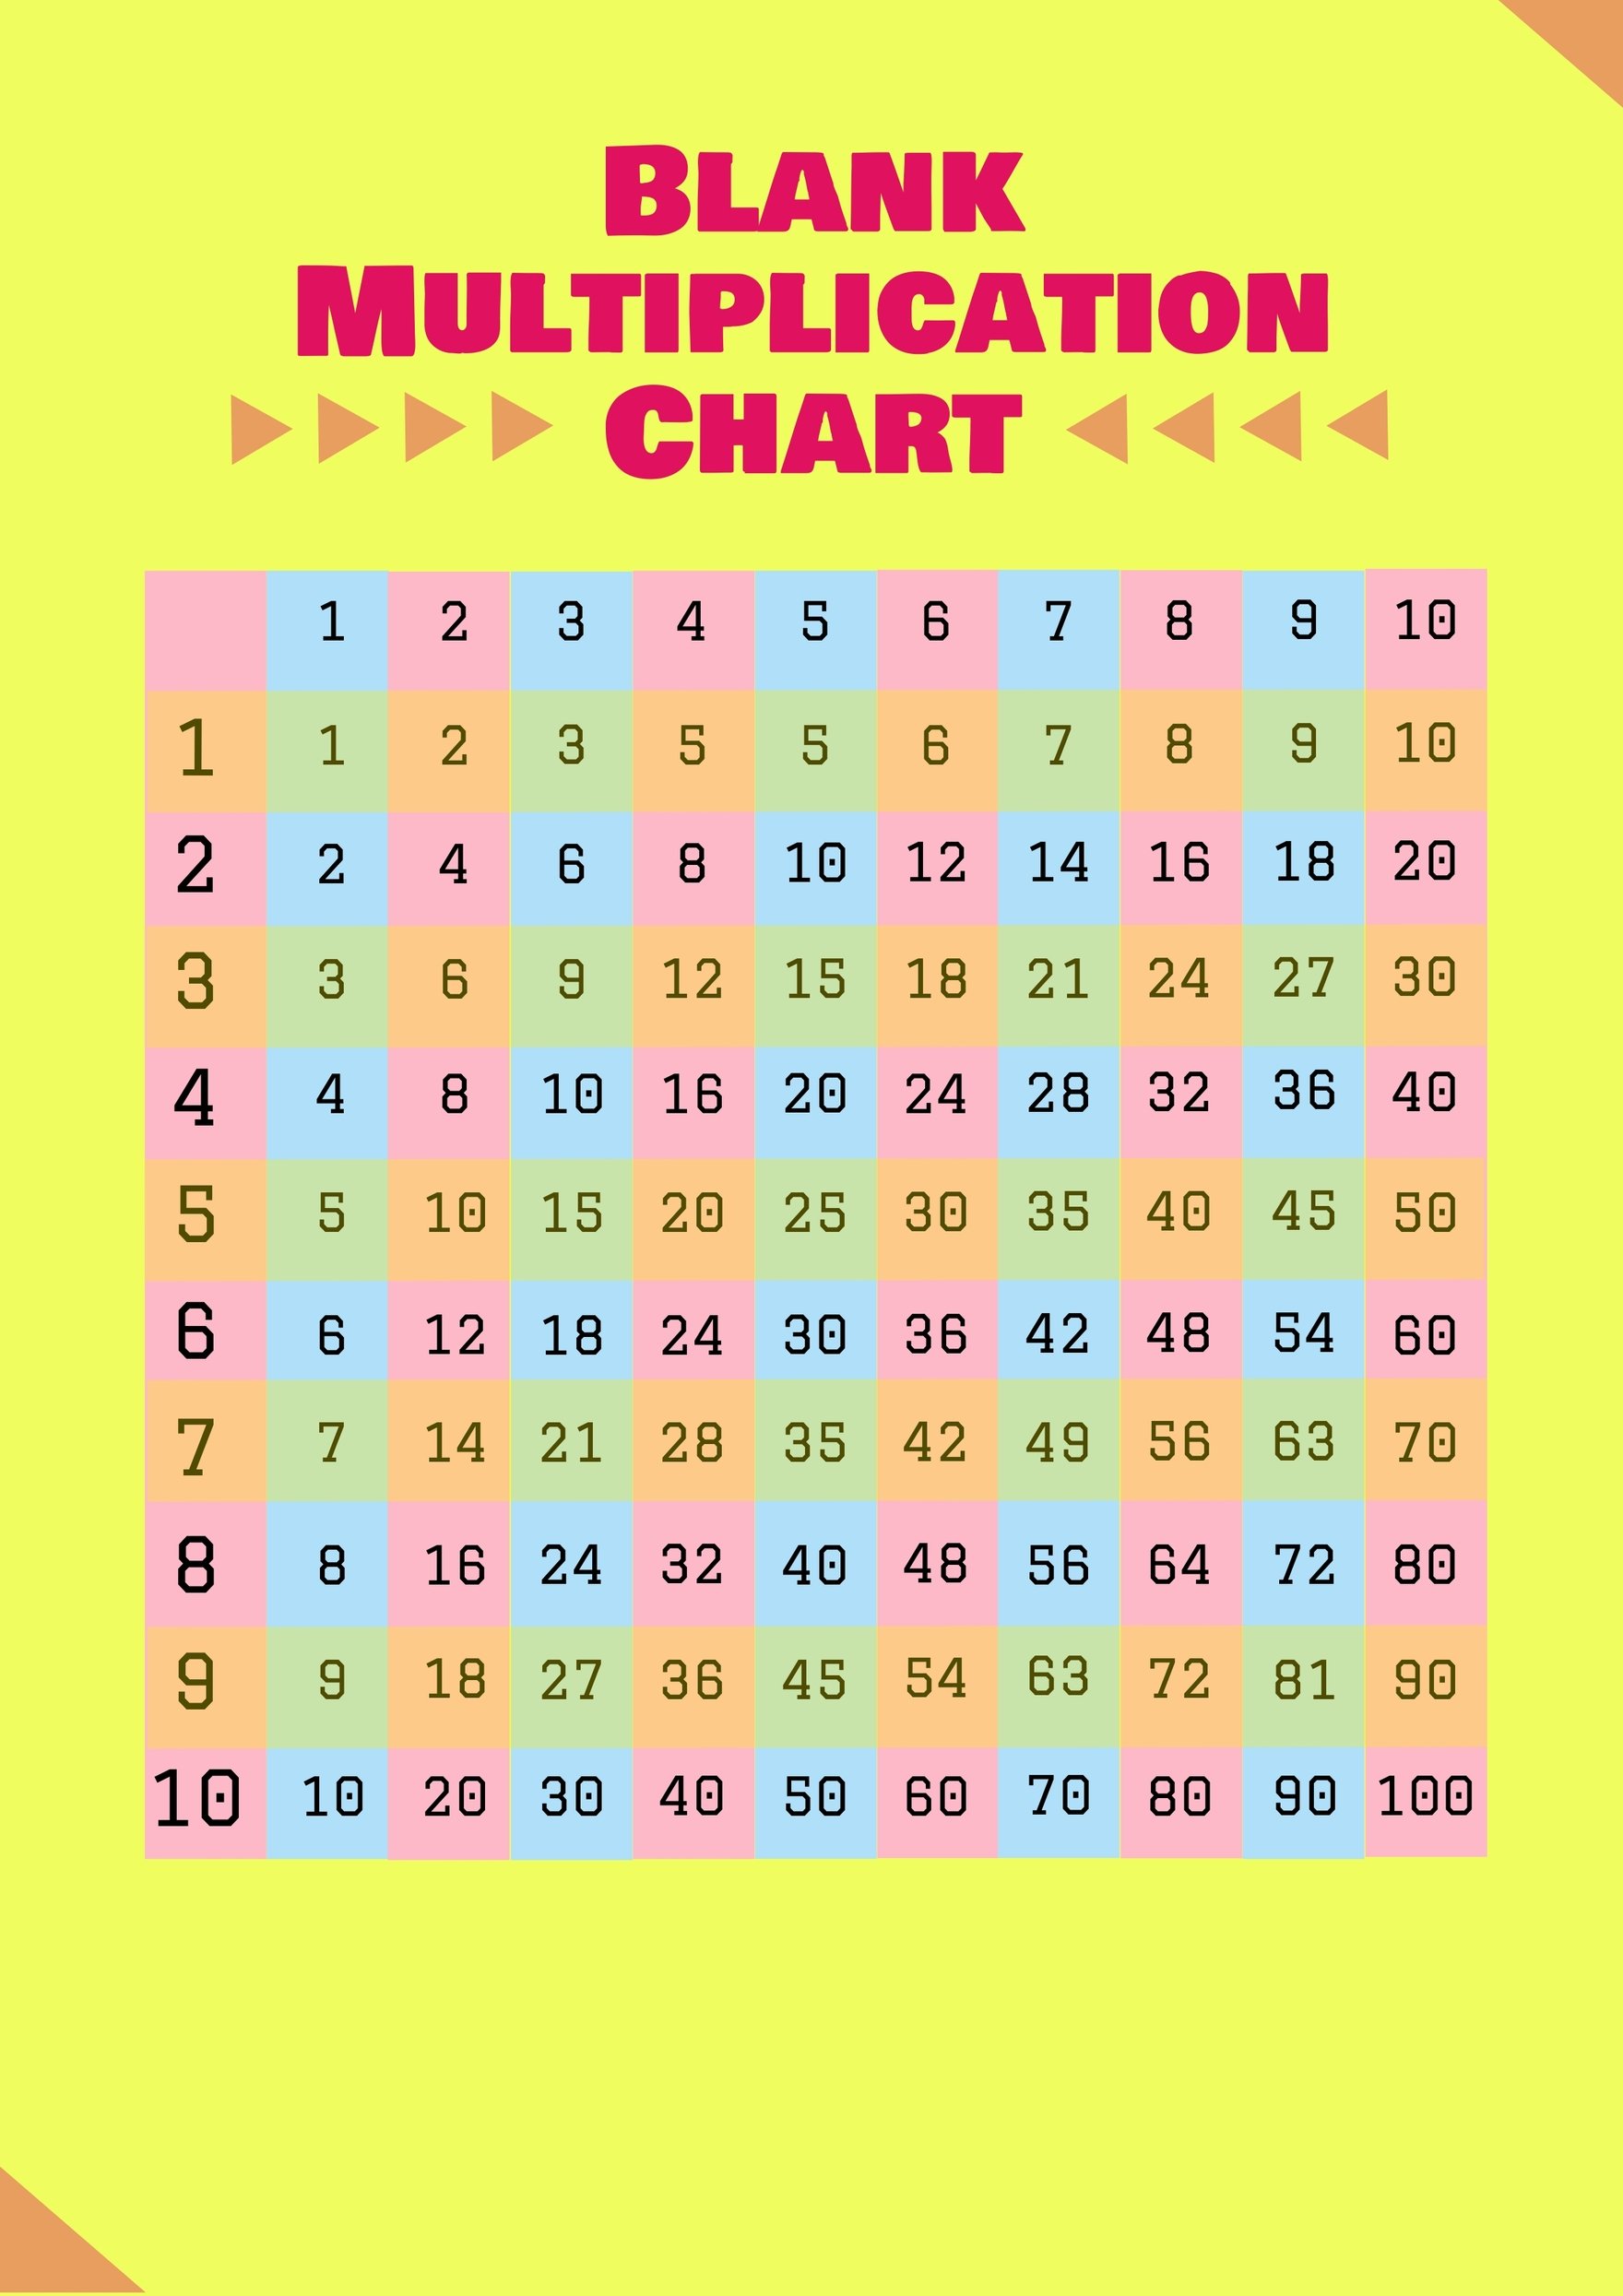 free-blank-multiplication-chart-download-in-pdf-illustrator-template